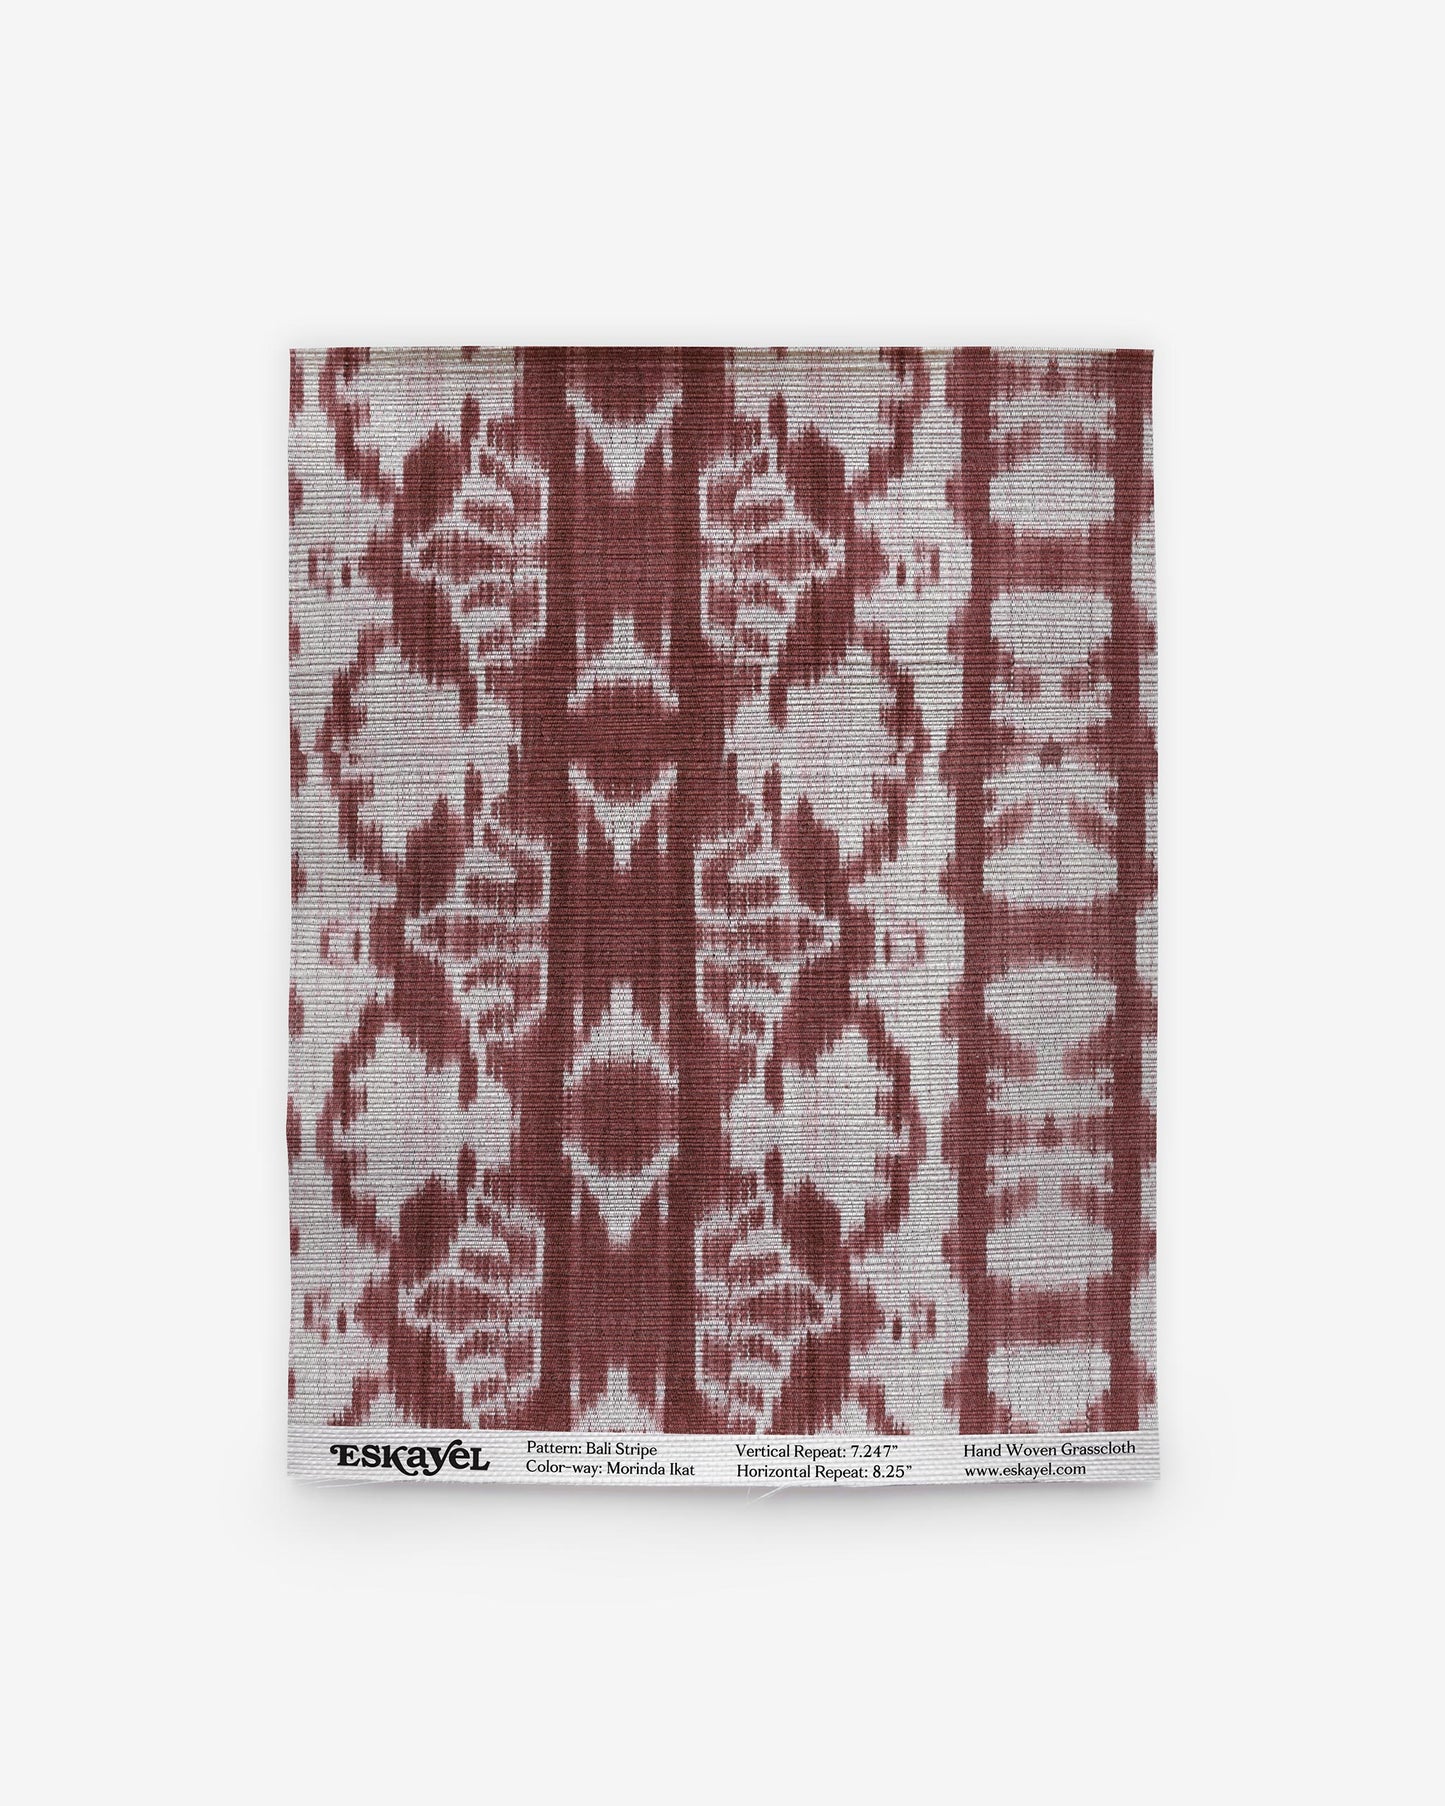 A high-end Bali Stripe Grasscloth 15'ft Single Roll Morinda Ikat pattern in red and white on wallpaper